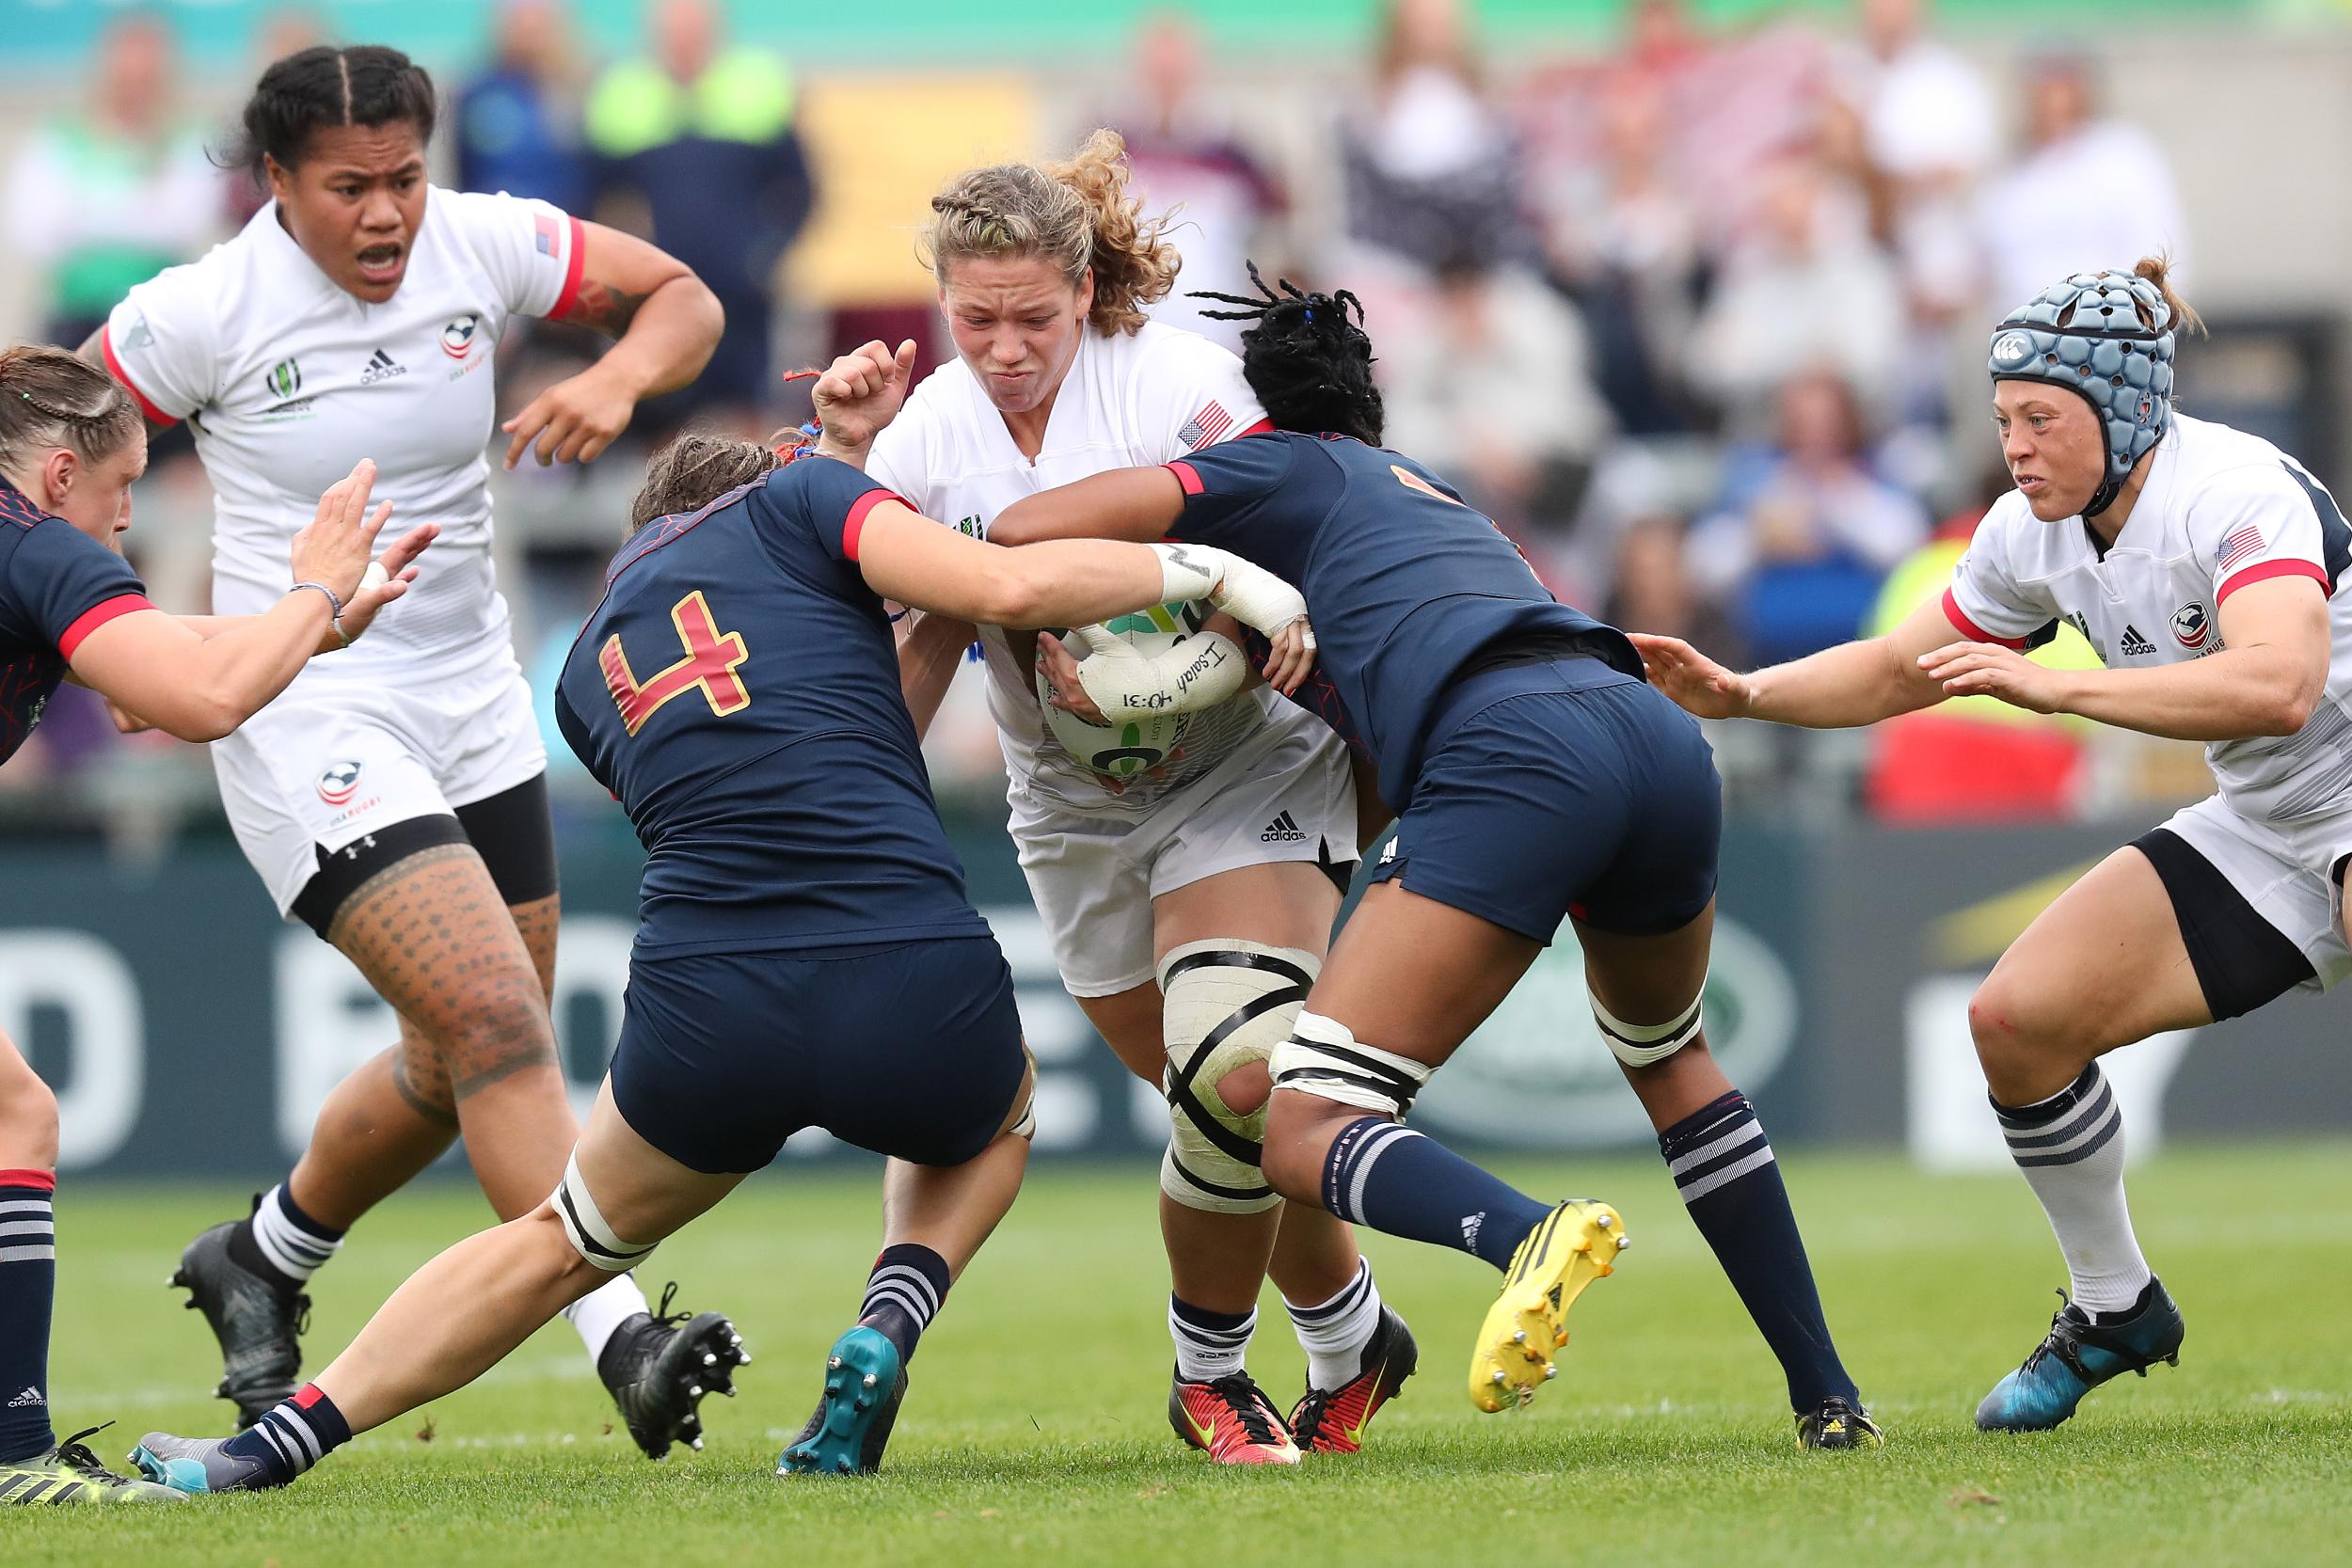 USA Finishes 4th at Women's Rugby World Cup After Narrow Loss to France